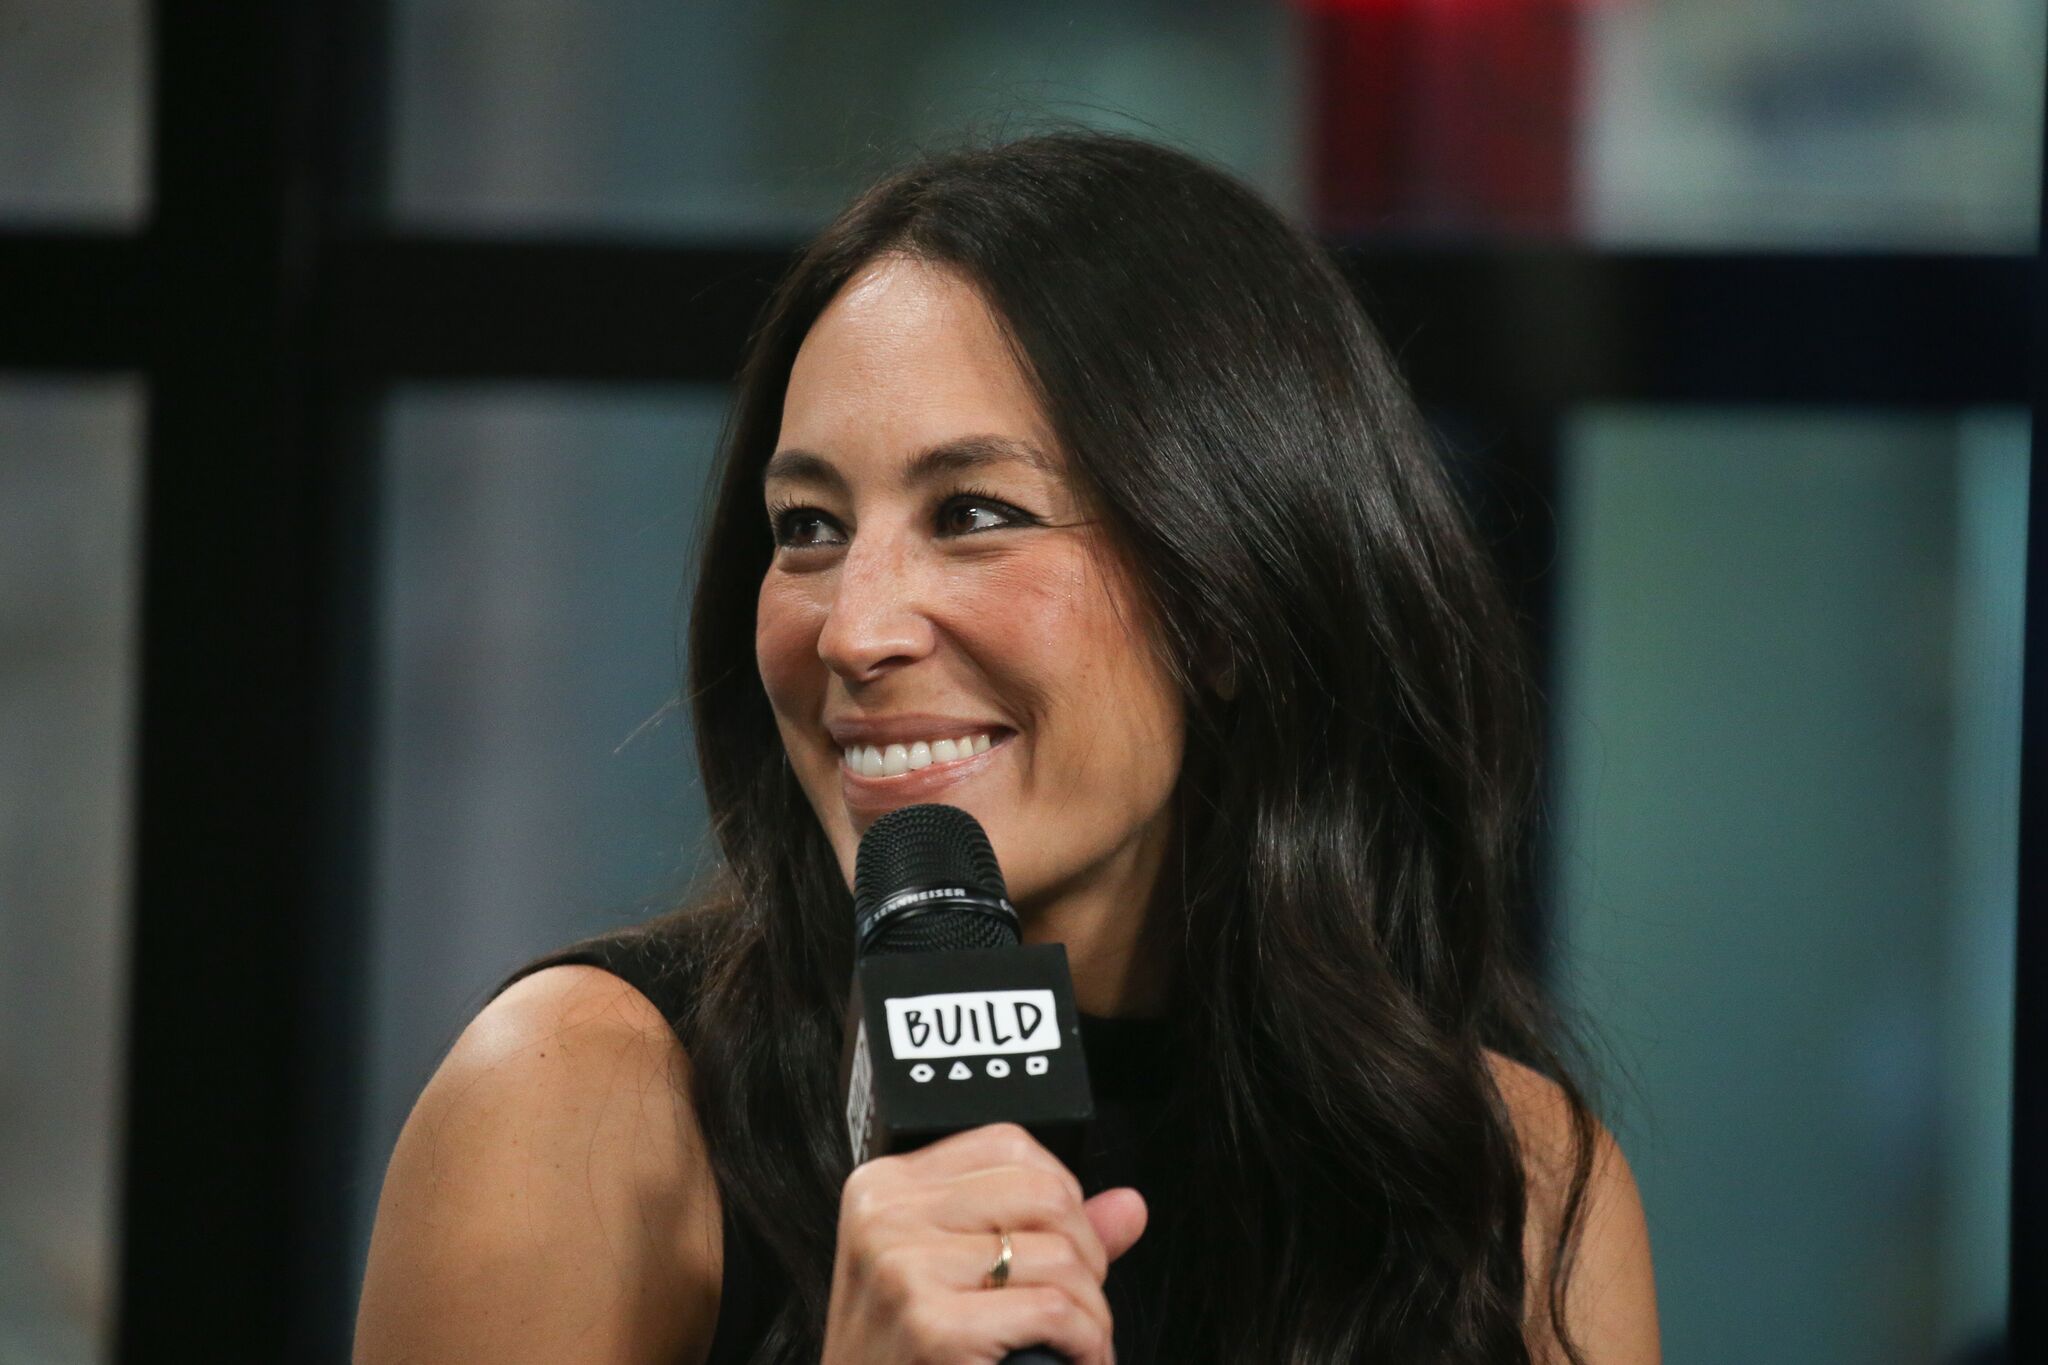 Joanna Gaines discusses new book, "Capital Gaines: Smart Things I Learned Doing Stupid Stuff" at Build Studio on October 18, 2017 | Photo: Getty Images